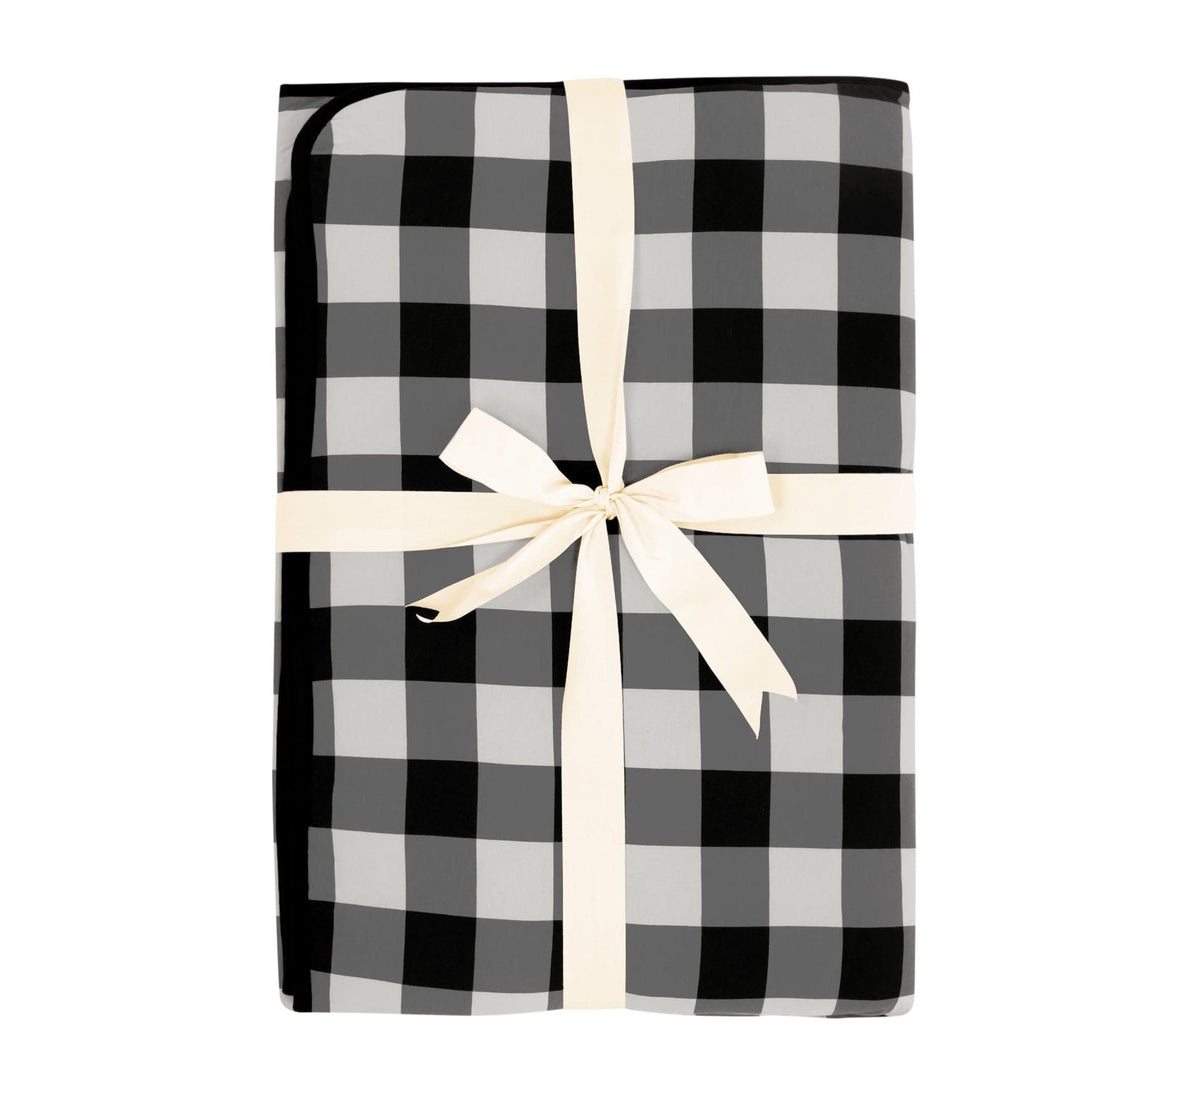 Kyte Baby Youth Blanket Midnight Plaid / Youth Youth Blanket in Midnight Plaid 2.5